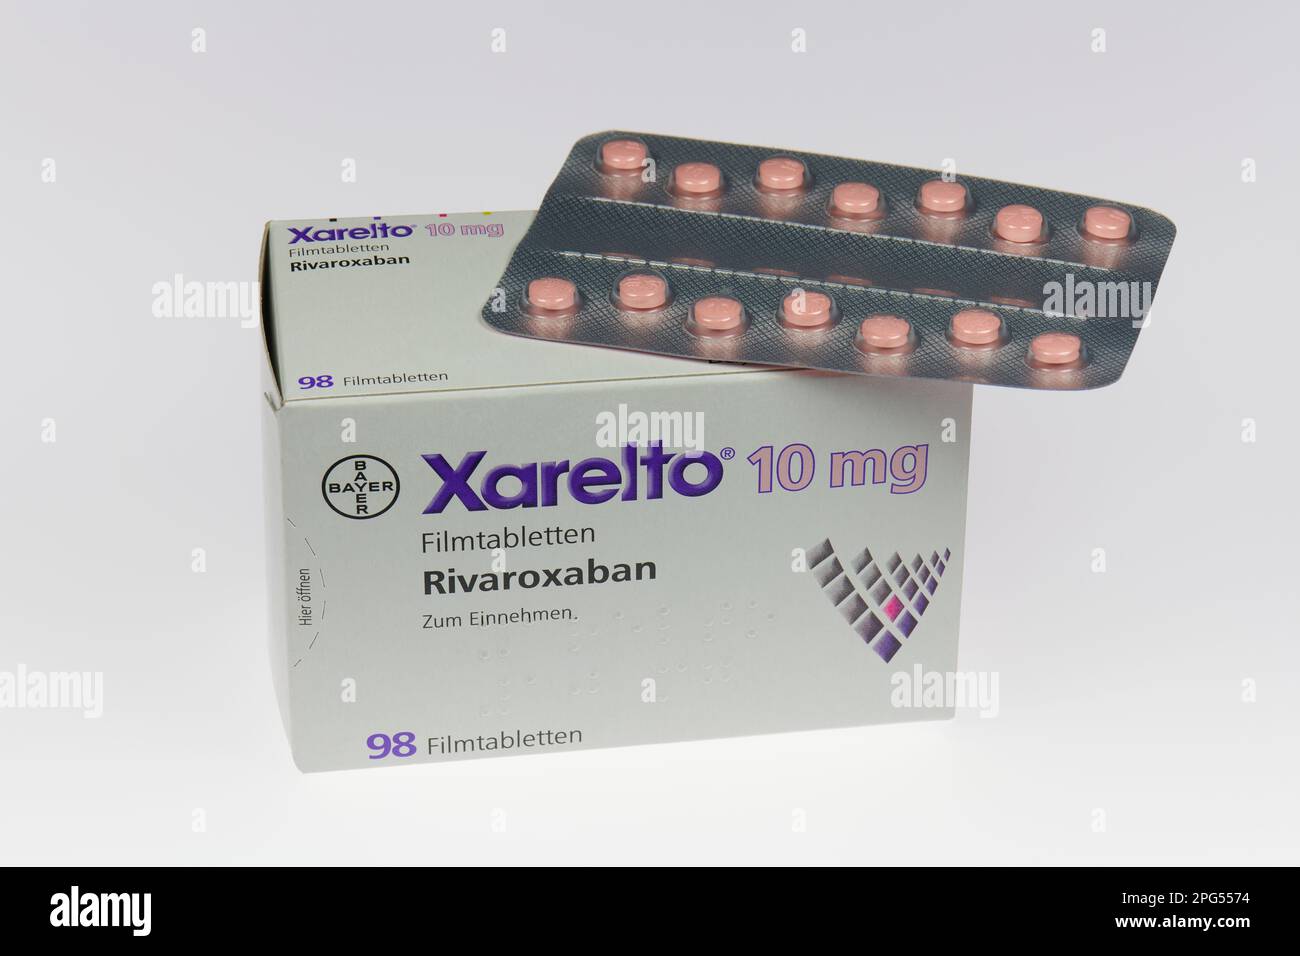 Xarelto medicine against thrombosis from Bayer company, Germany Stock Photo